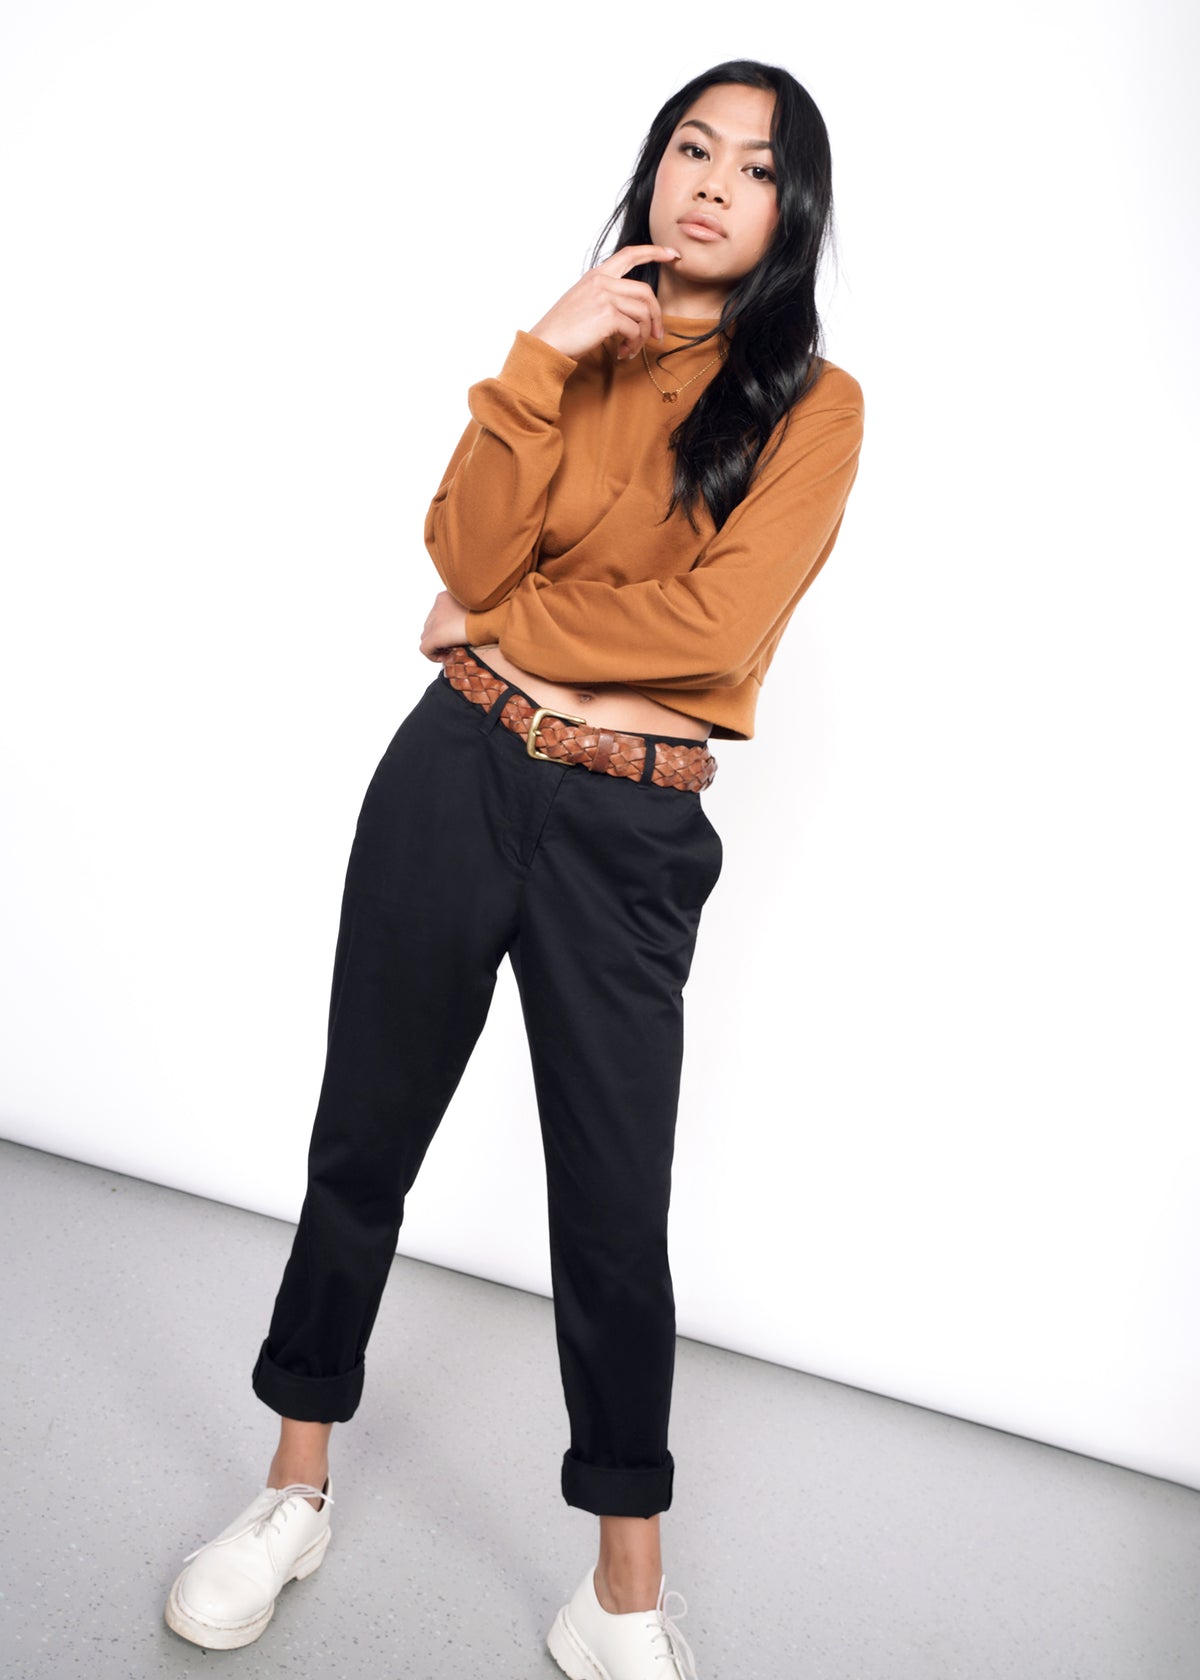 Model wearing black essential trouser in size two, styled with brown belt, burnt orange top, and white shoes